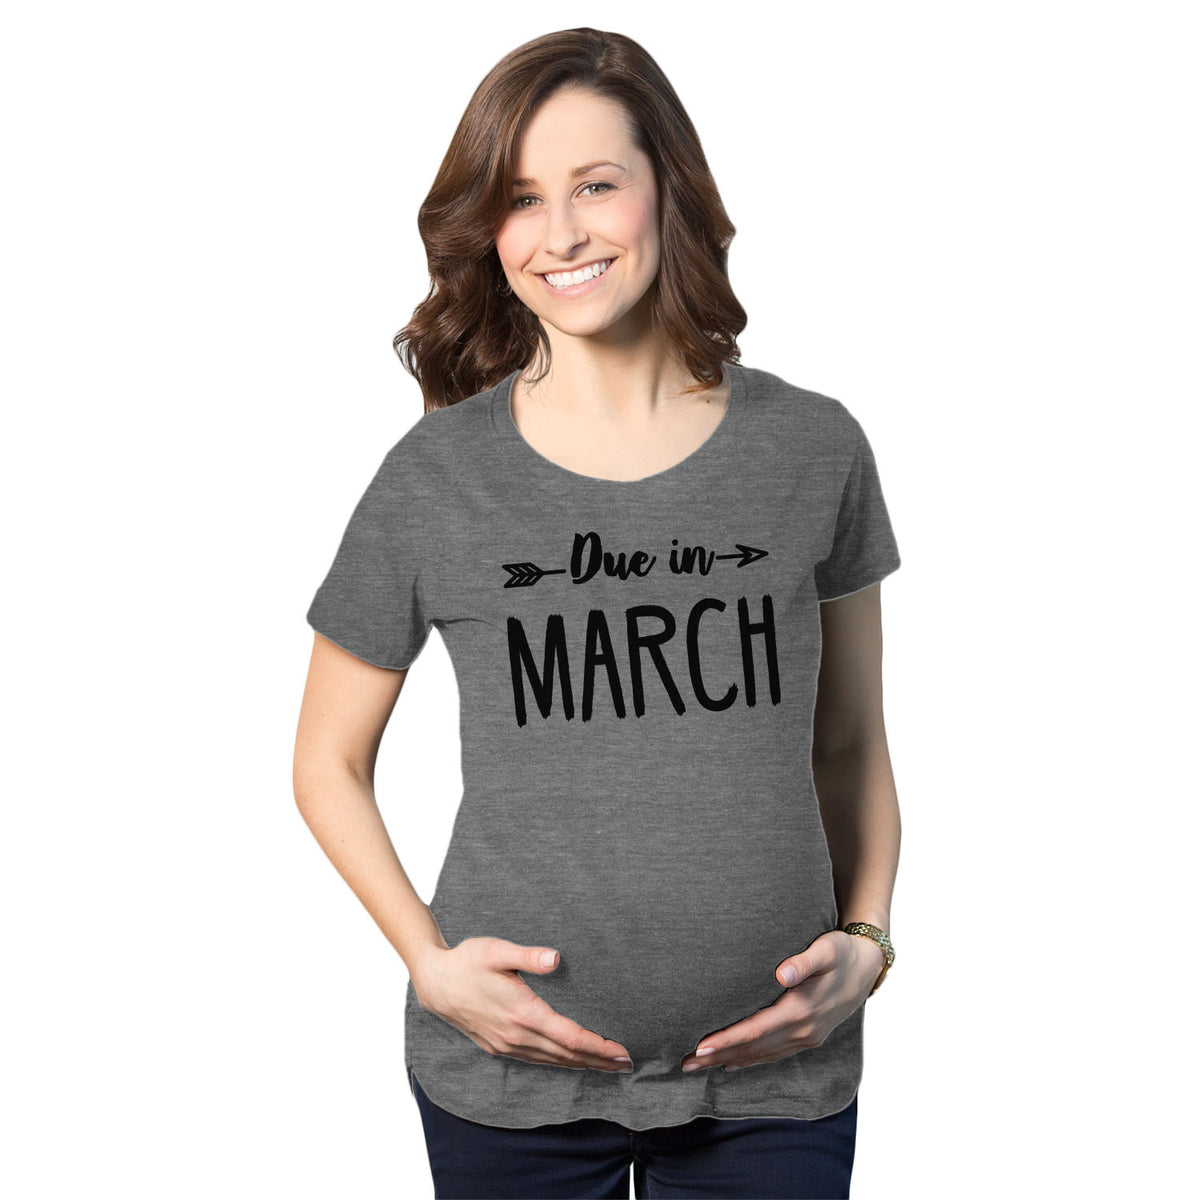 Funny Dark Heather Grey - March Due In Announcement Maternity T Shirt Nerdy Tee